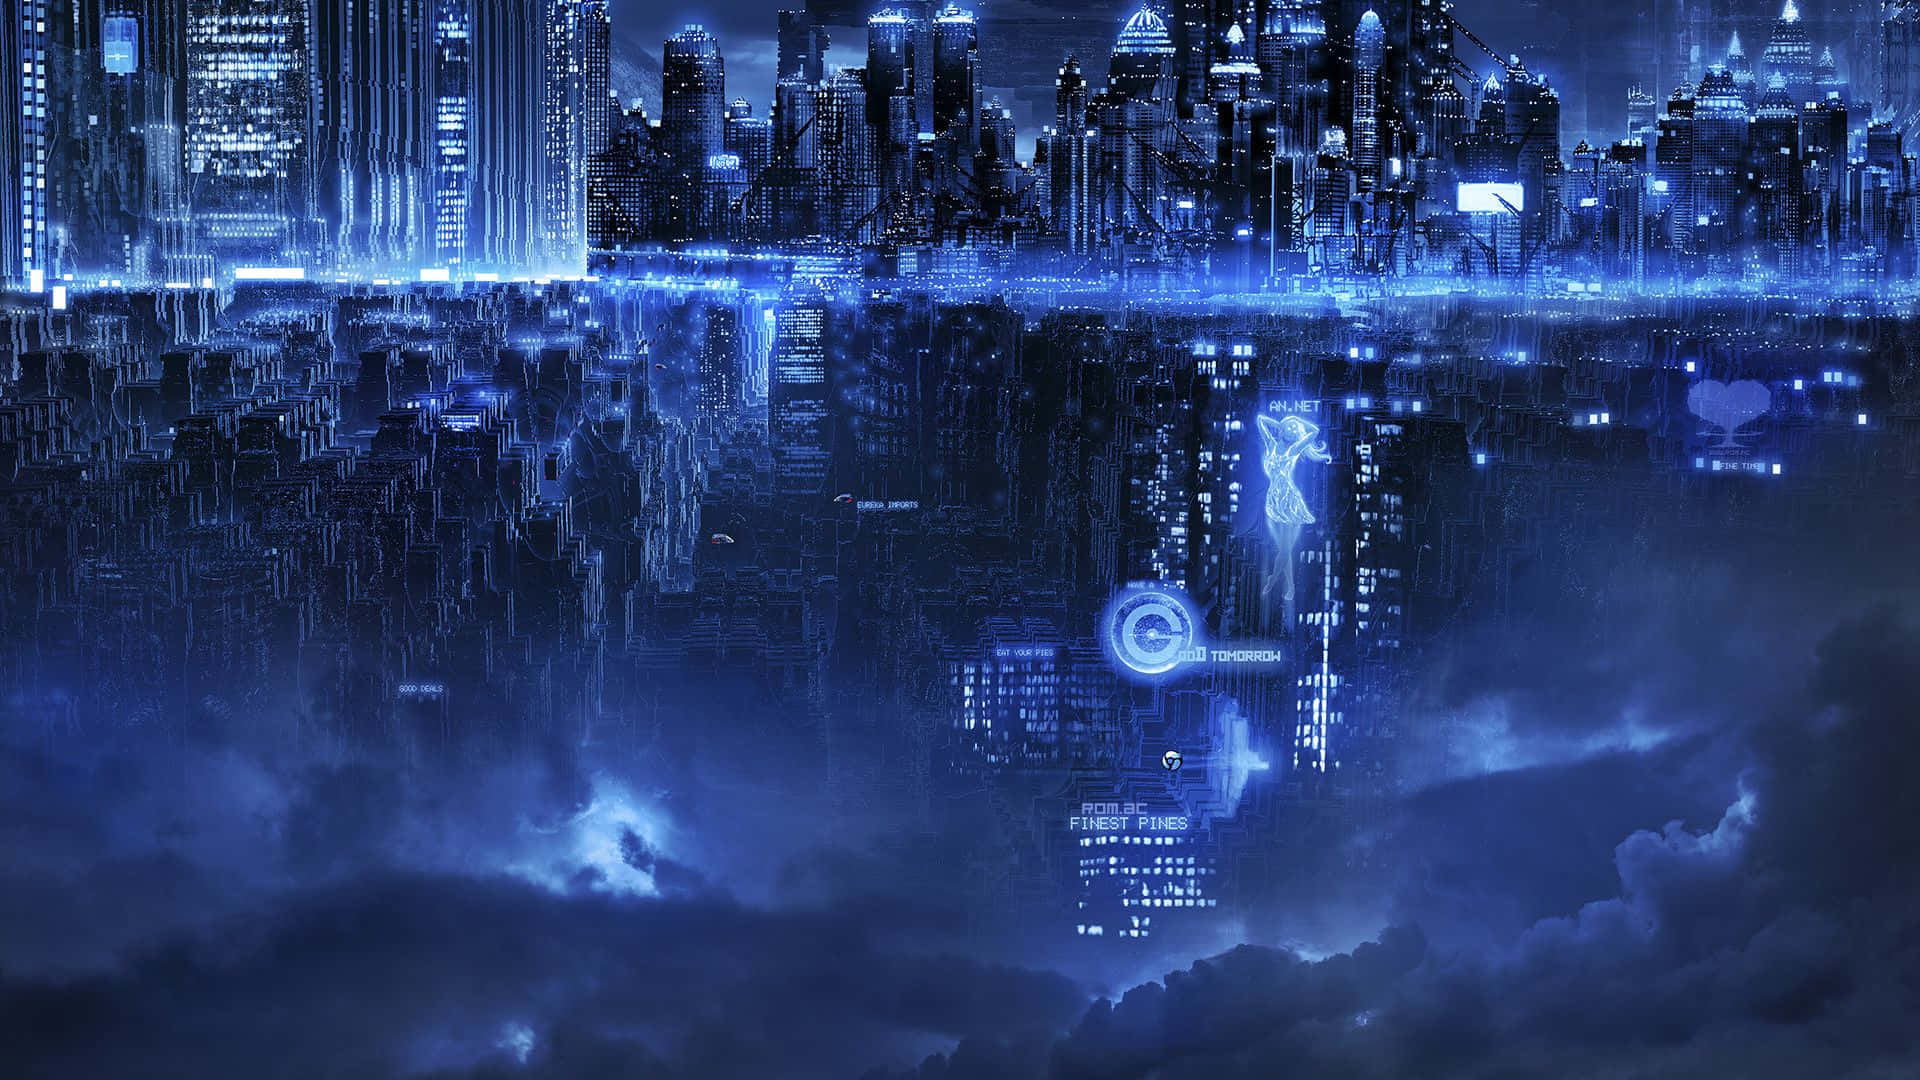 From the deep future, Innovation powers this ever-evolving city Wallpaper